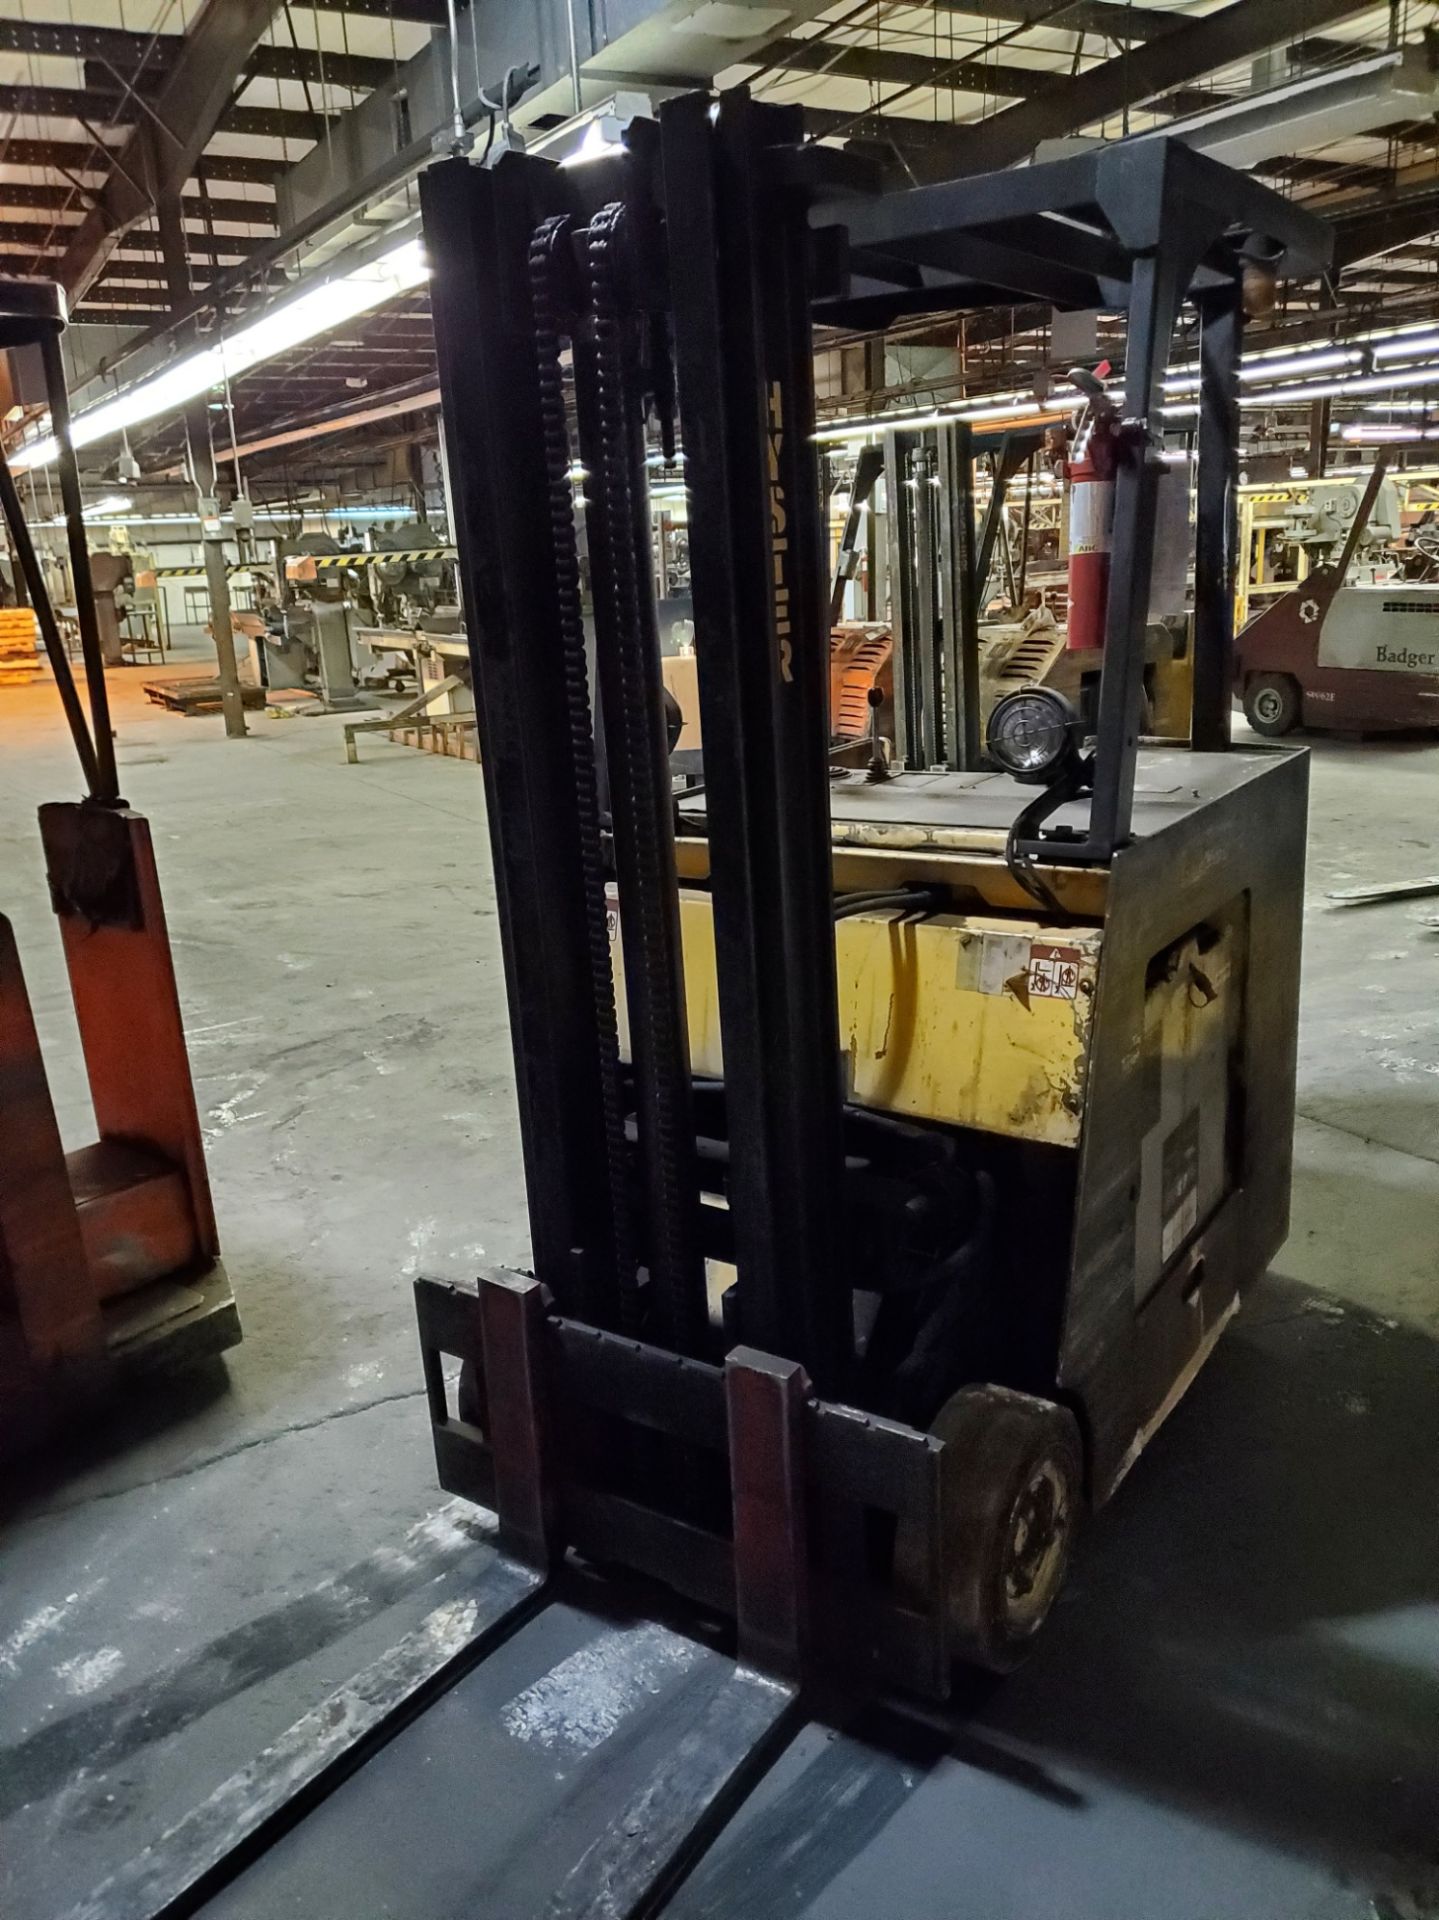 Hyster E40CR 4,000-Lb Standup Electric Forklift Truck - Image 2 of 2